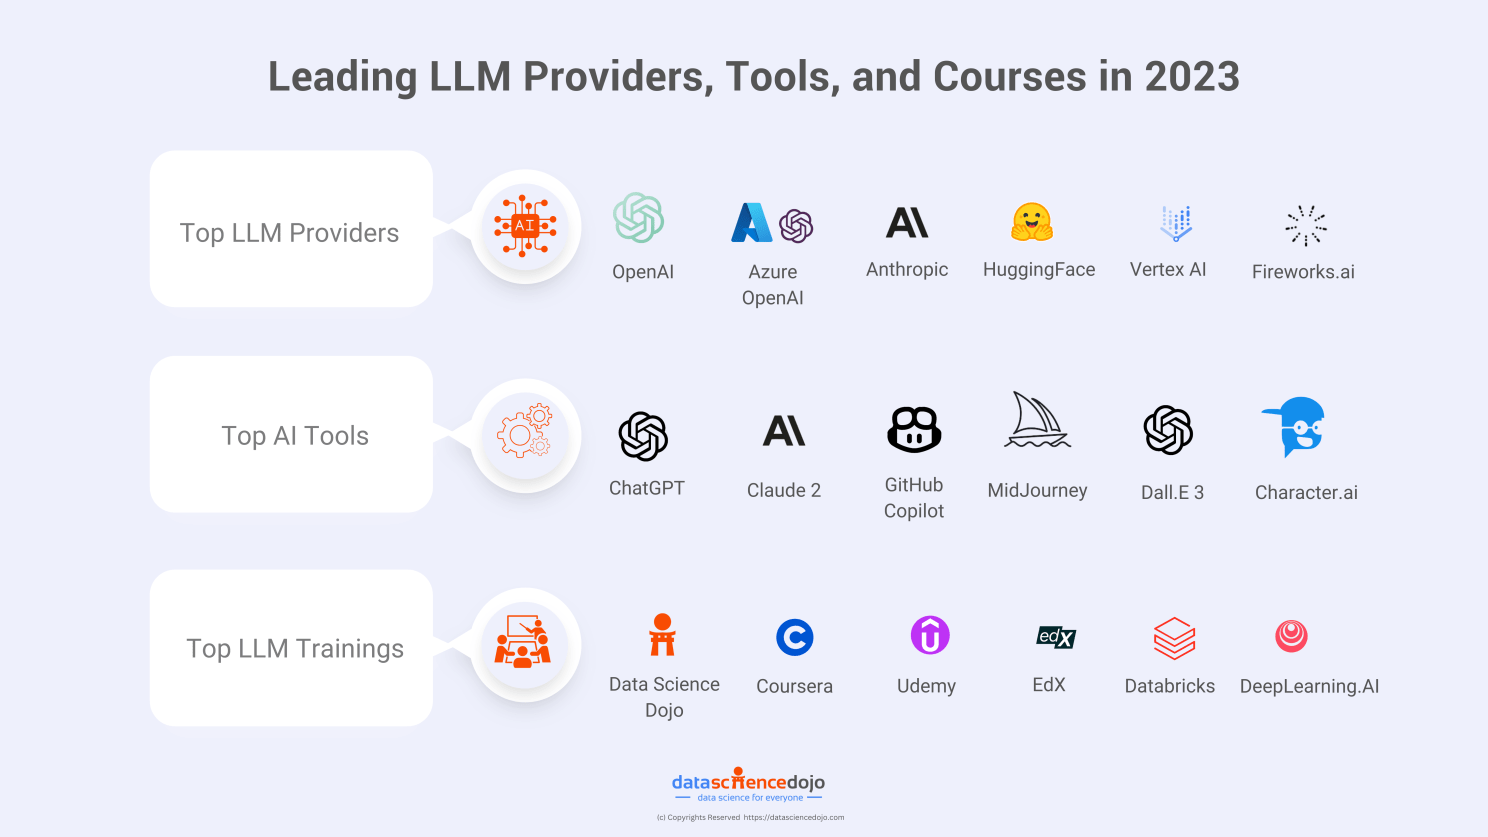 Leading LLM Providers, Tools and Courses in 2023